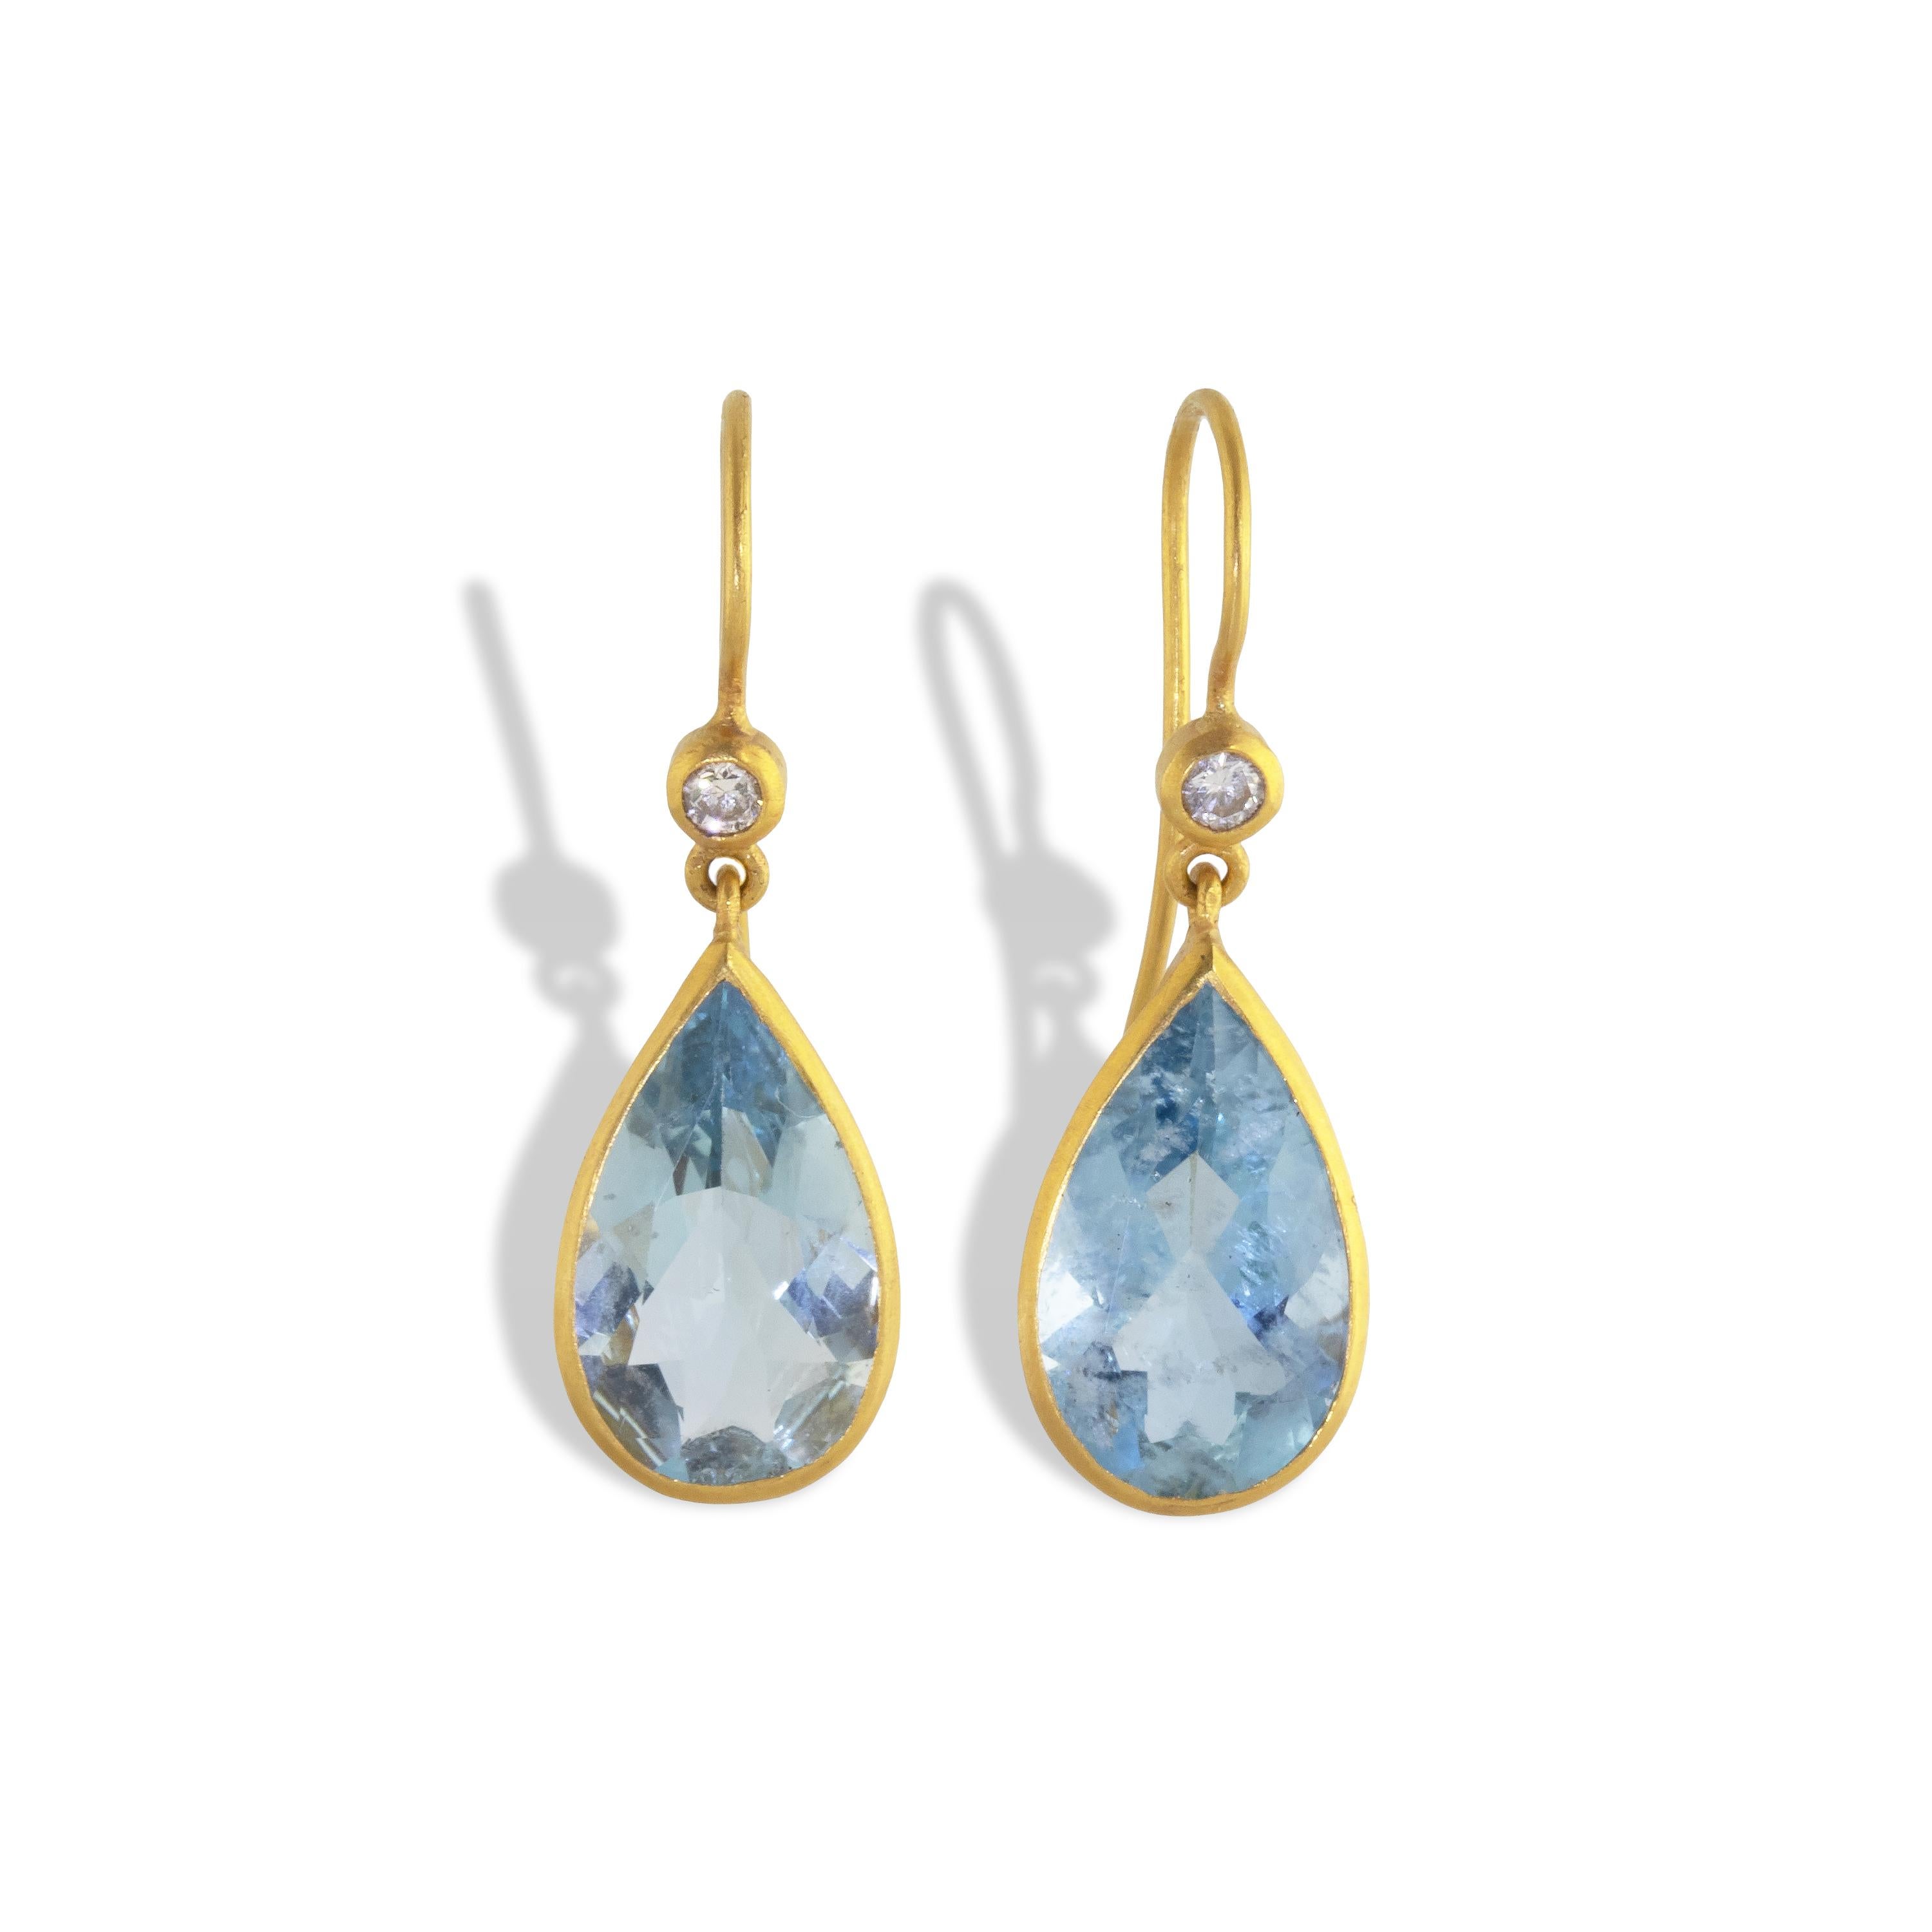 Beautifully unique 5.52 carats of Santa Maria aquamarine drop earrings set in pure brushed 22k yellow gold and accented with .06 carats of round diamonds. The earrings feature large deep blue pear shaped gemstones with a wavy bezel as an ode to the